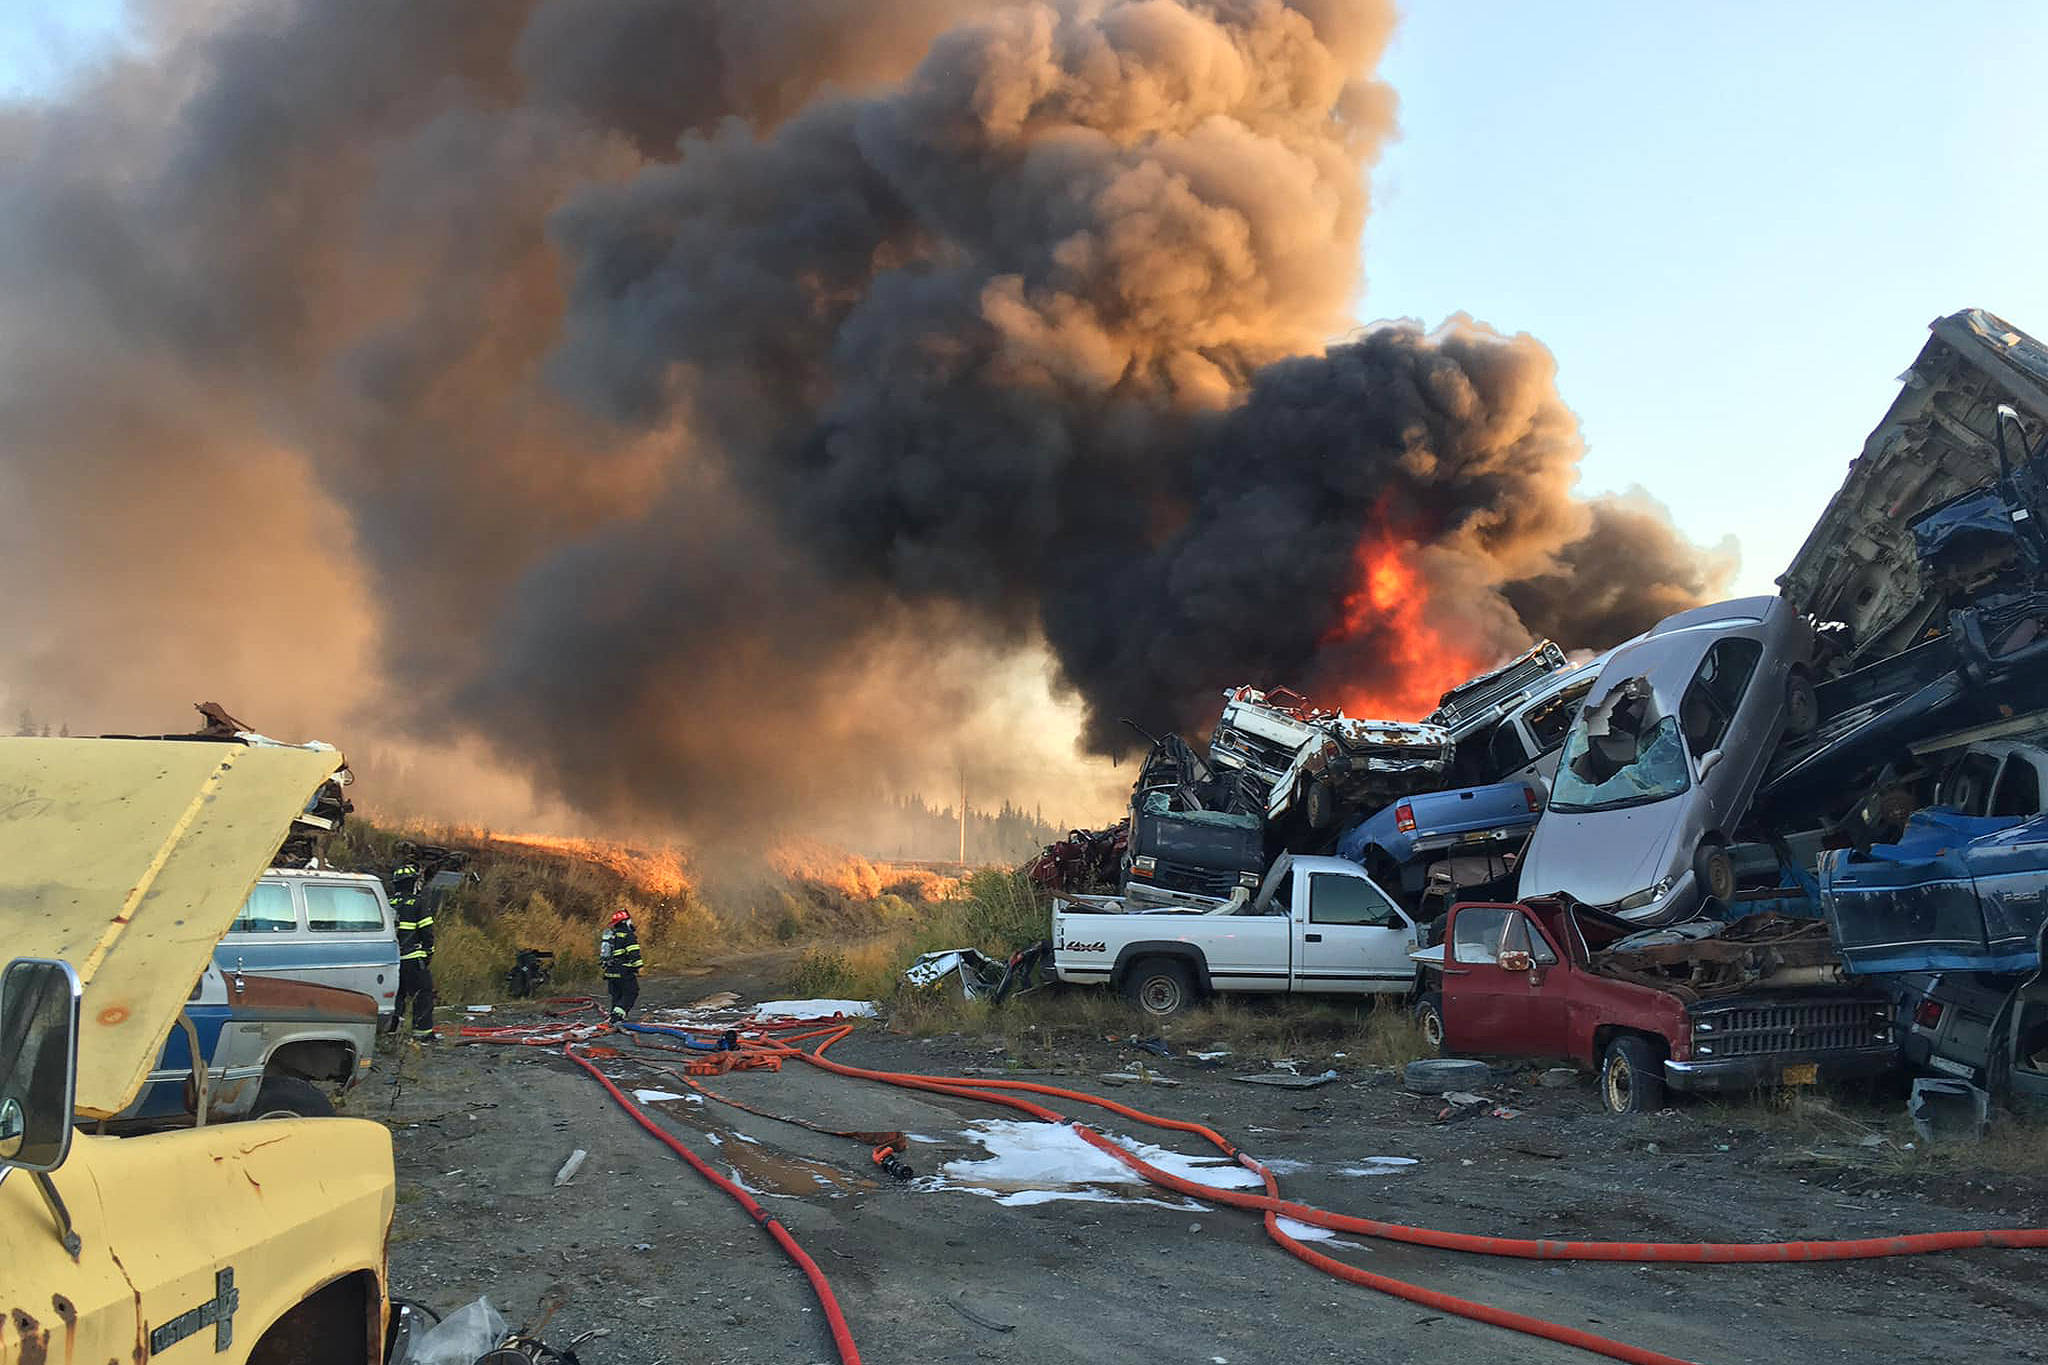 Firefighters work to extinguish a fire in a pile of scrap vehicles on Greenfield Road on Sunday, Oct. 6, 2019 in Anchor Point, Alaska. (Photo courtesy Anchor Point Fire and Emergency Services)